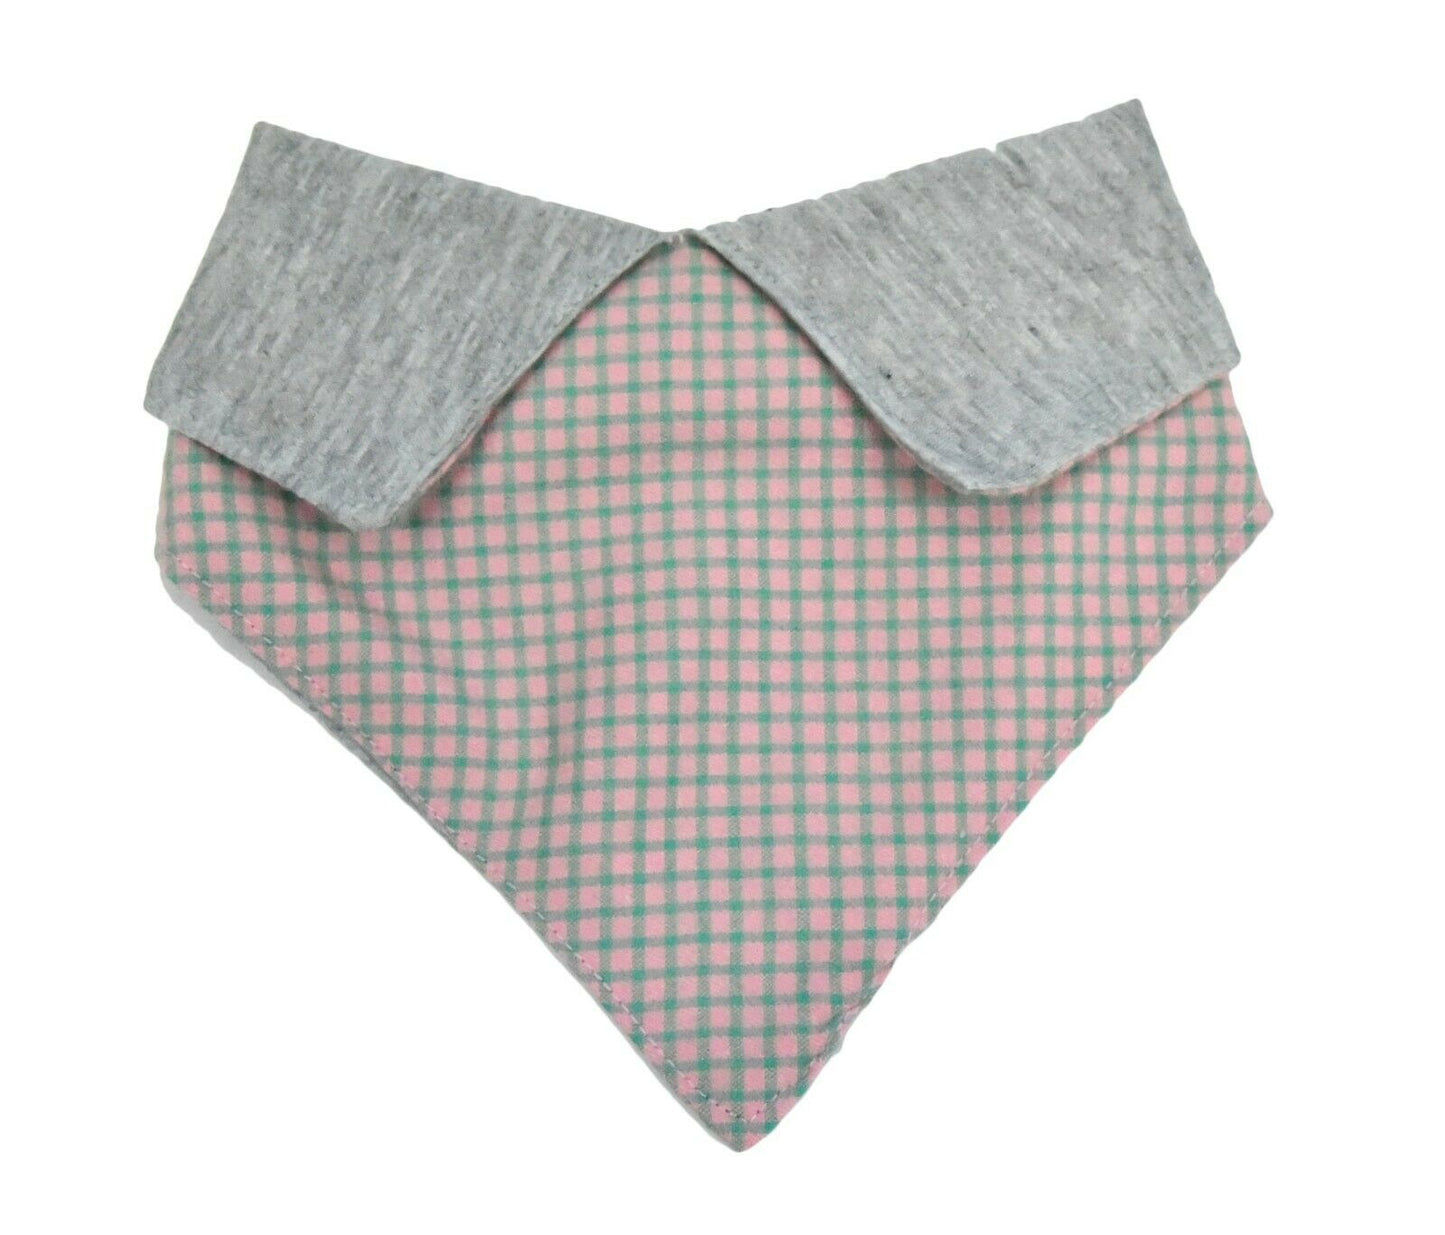 Baby Toddler Bibs with Shirt for a Gift Idea for Boys Girls in Unisex Colours